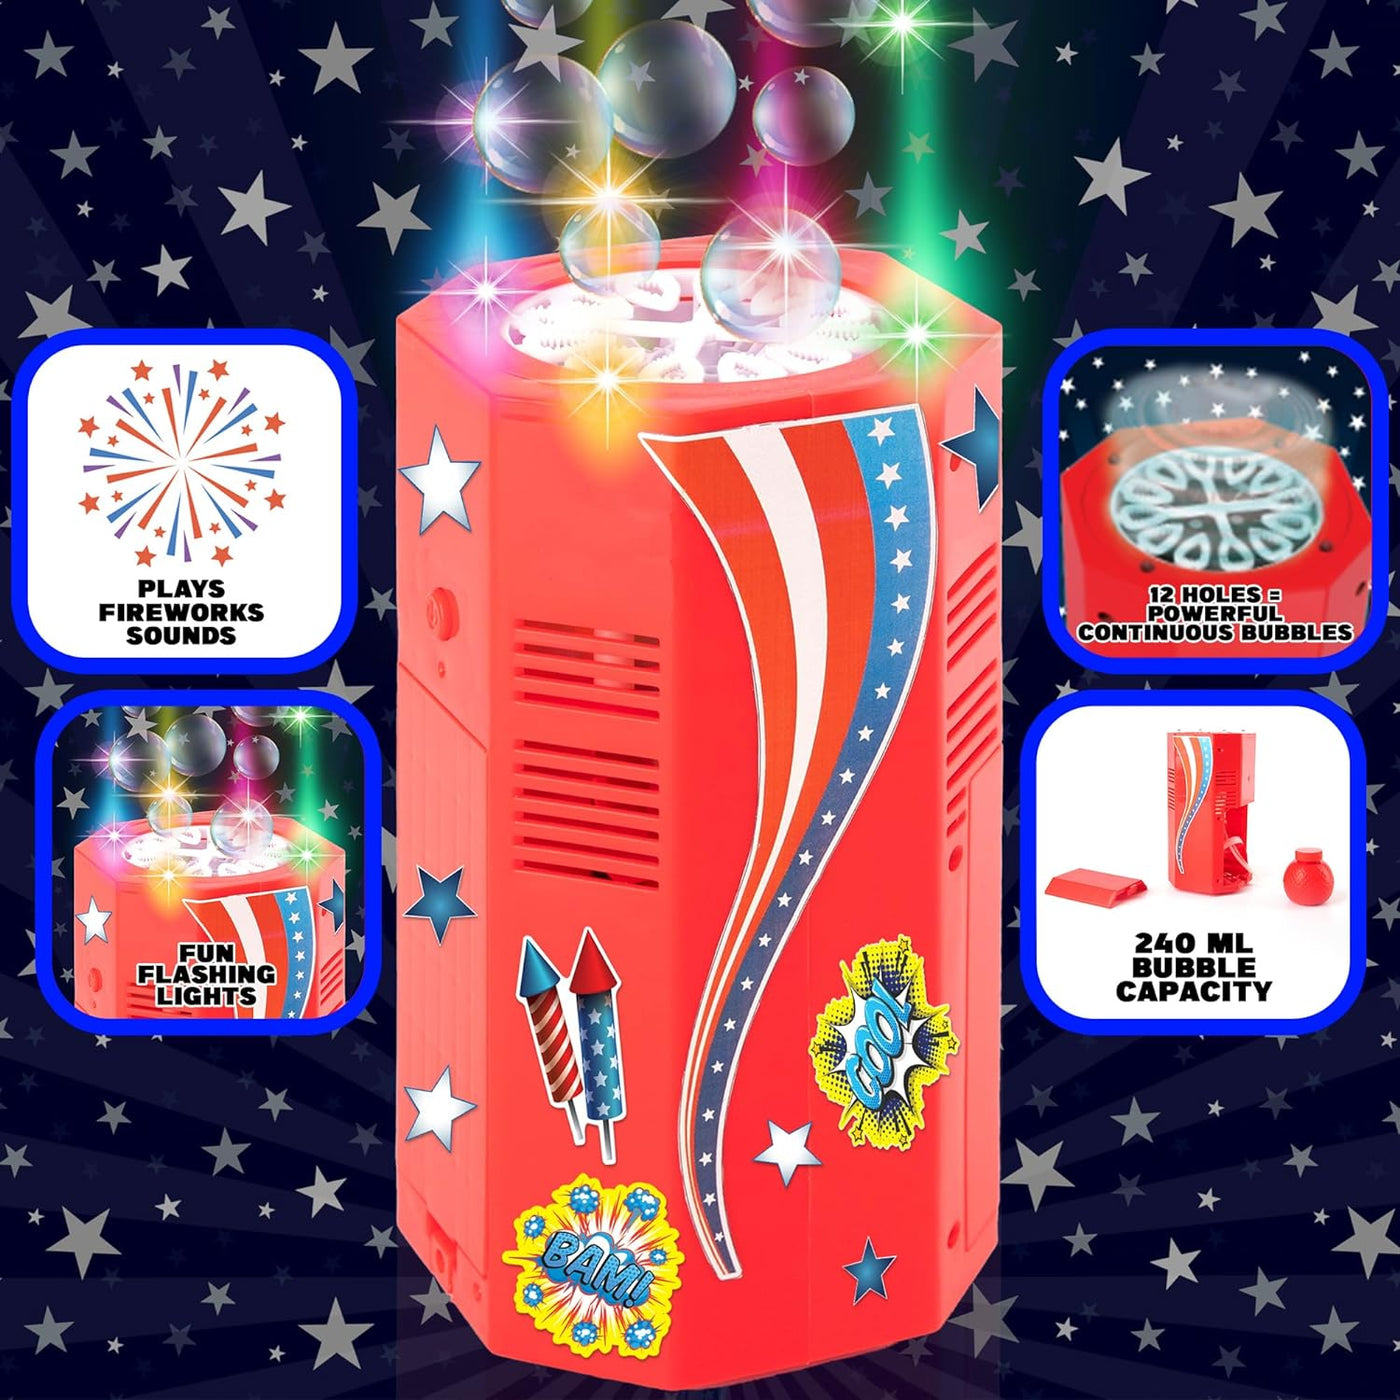 ArtCreativity Fireworks Bubble Machine - Electric Bubble Blower Toy with Fireworks Sound Effects and Flashing LED Lights - Includes Bubble Solution, Batteries, Stickers - 4th of July Party Supplies